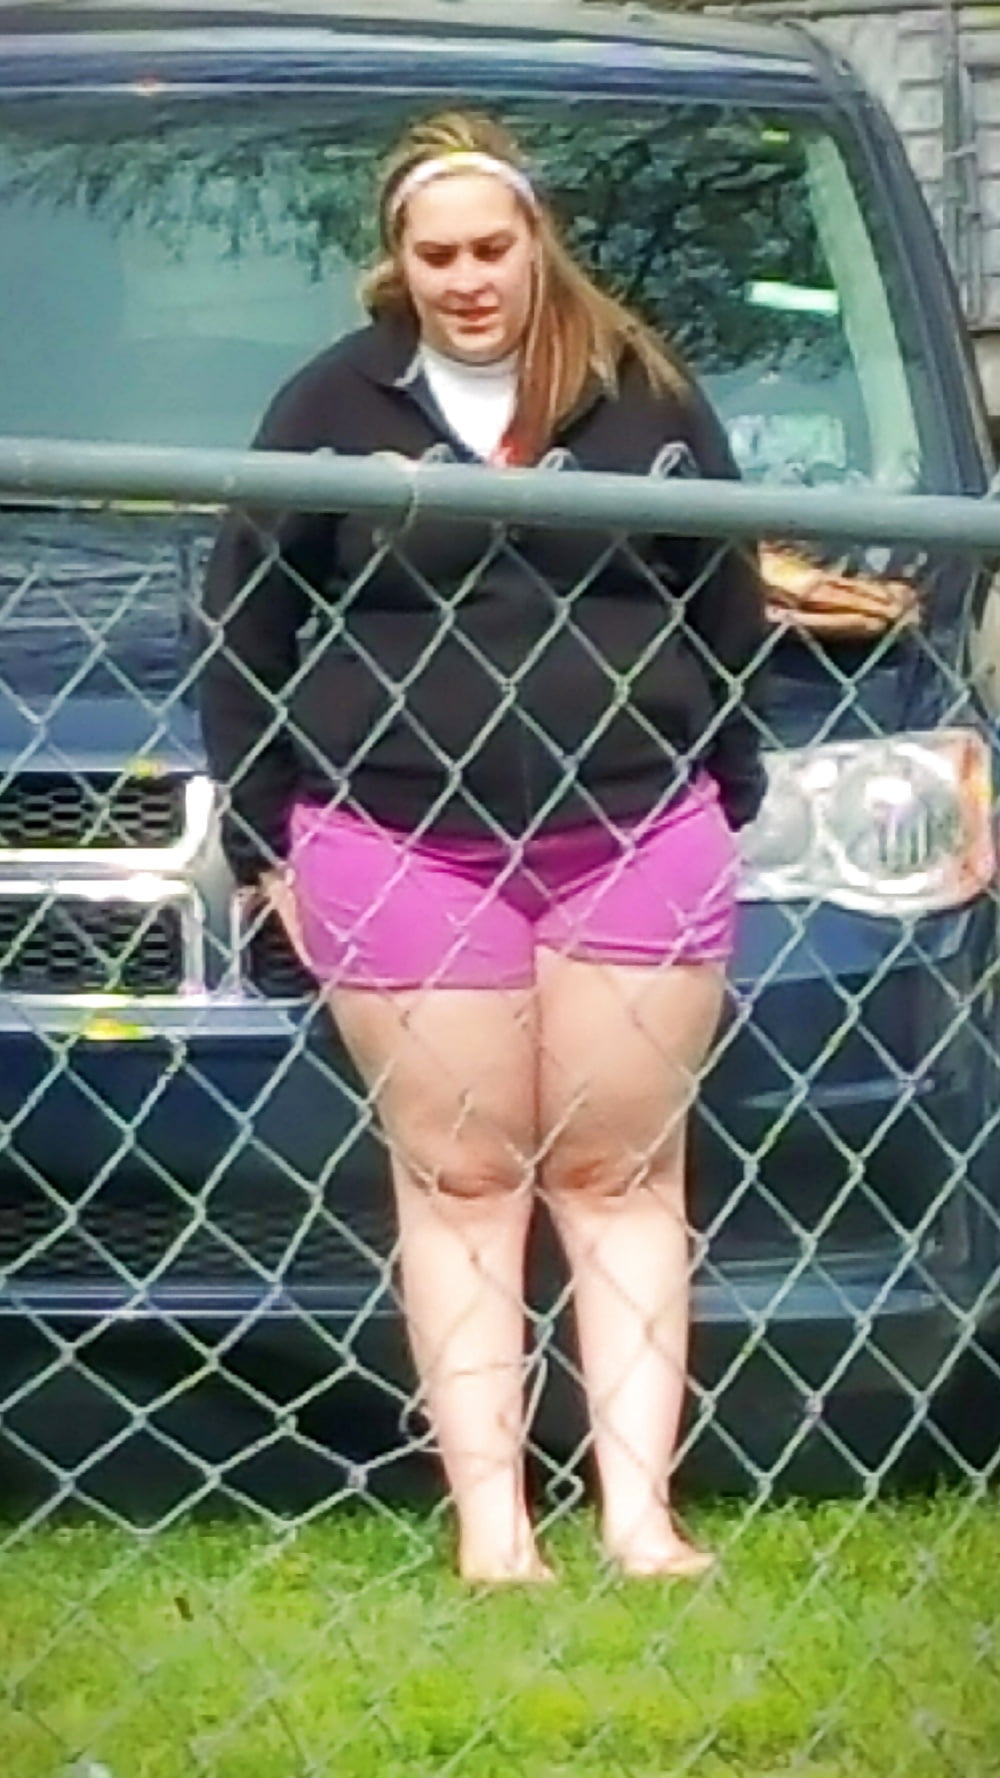 Sex fat young mom backyard voyeur for comments image